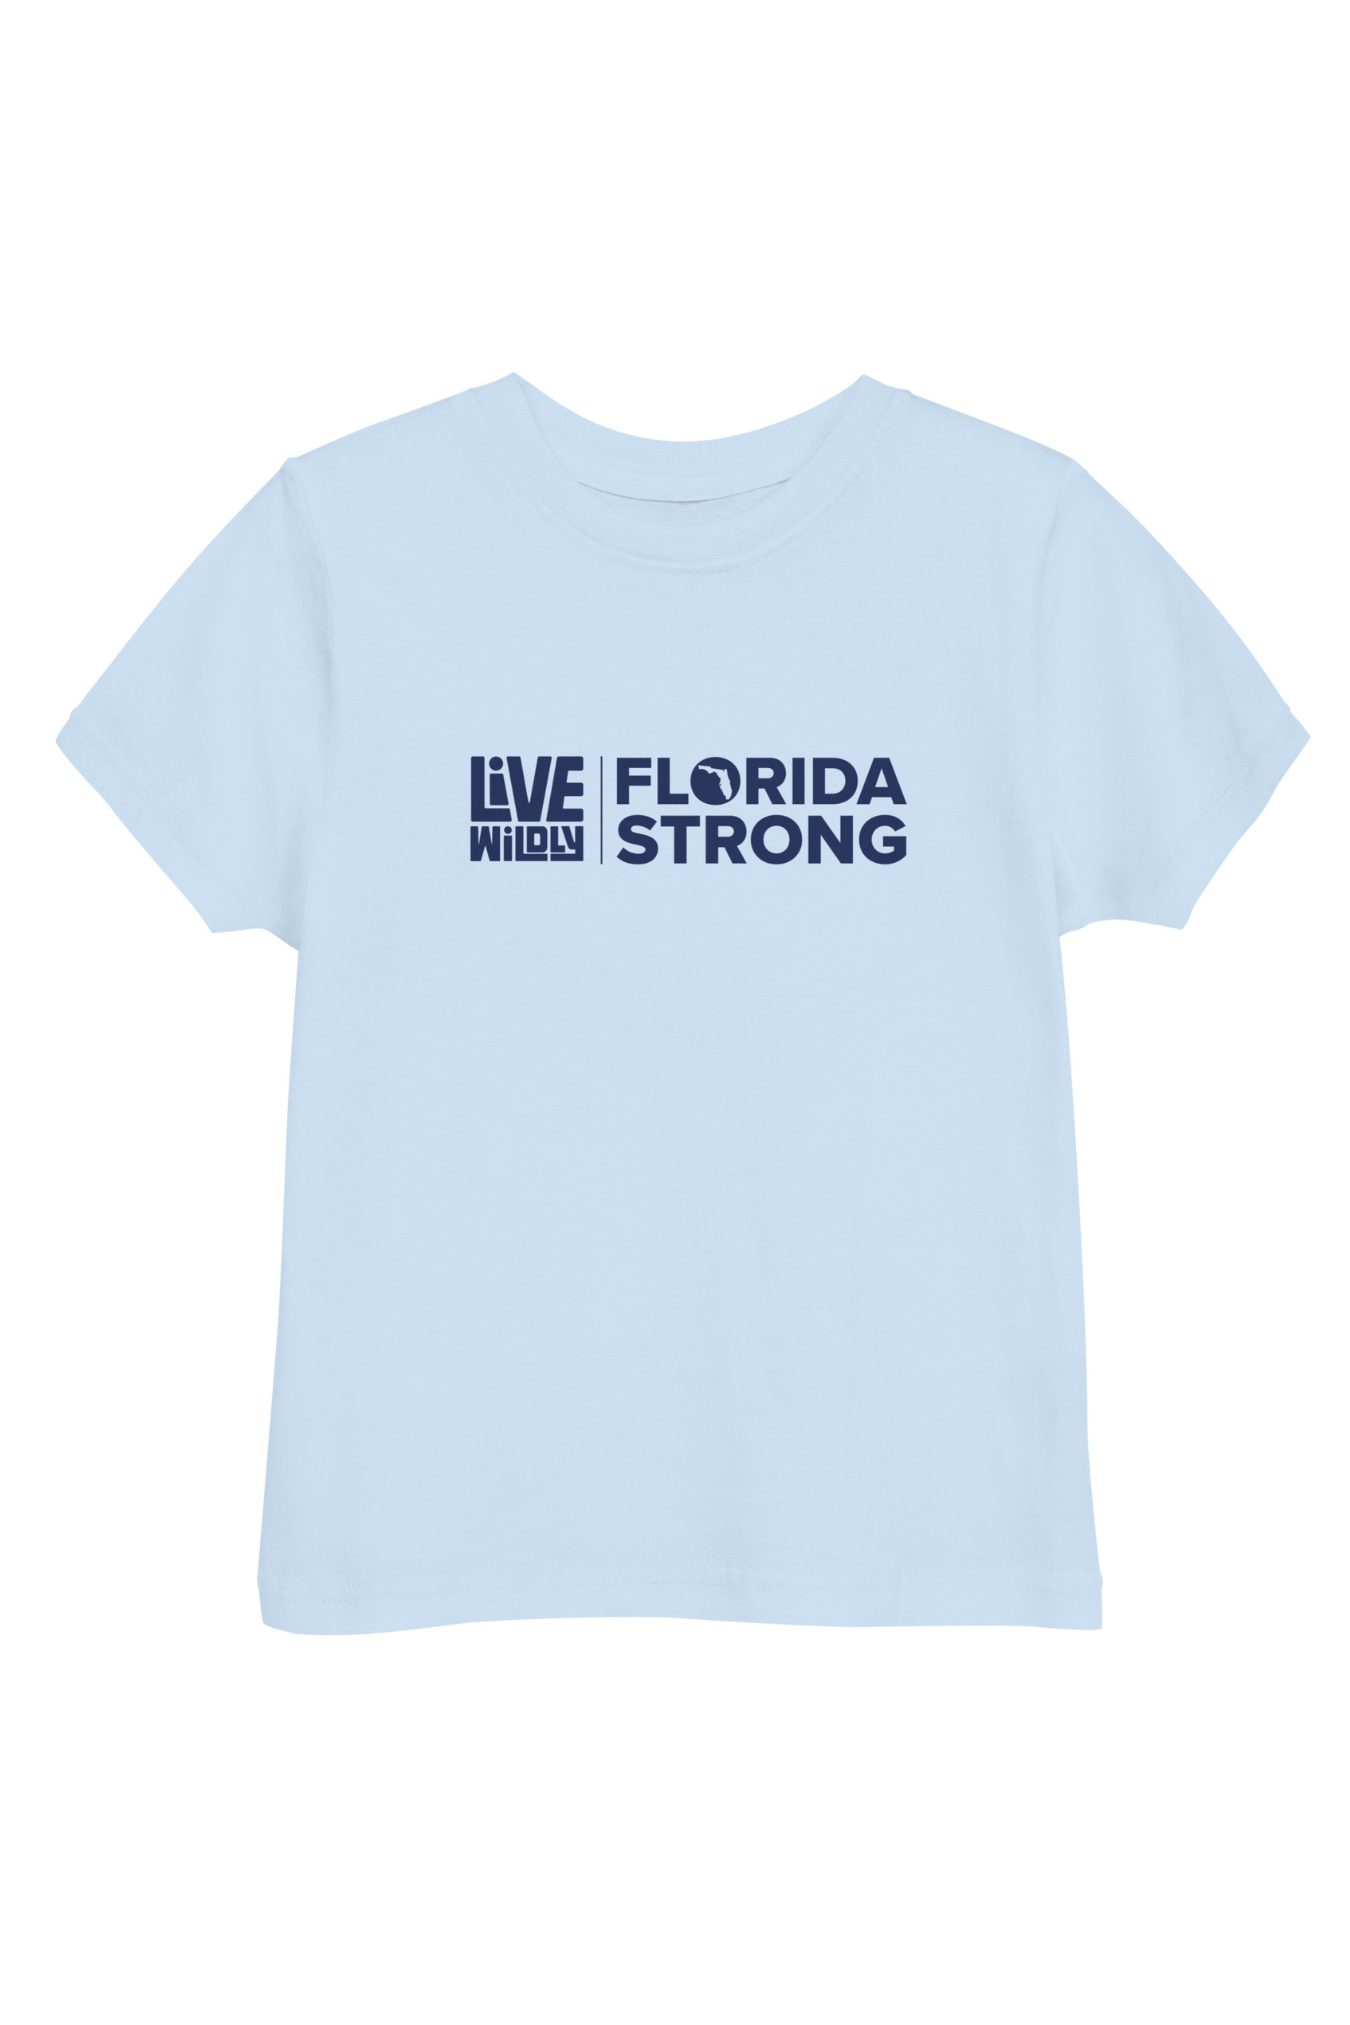 Florida Strong - Toddler Tee - Blue - Live Wildly 